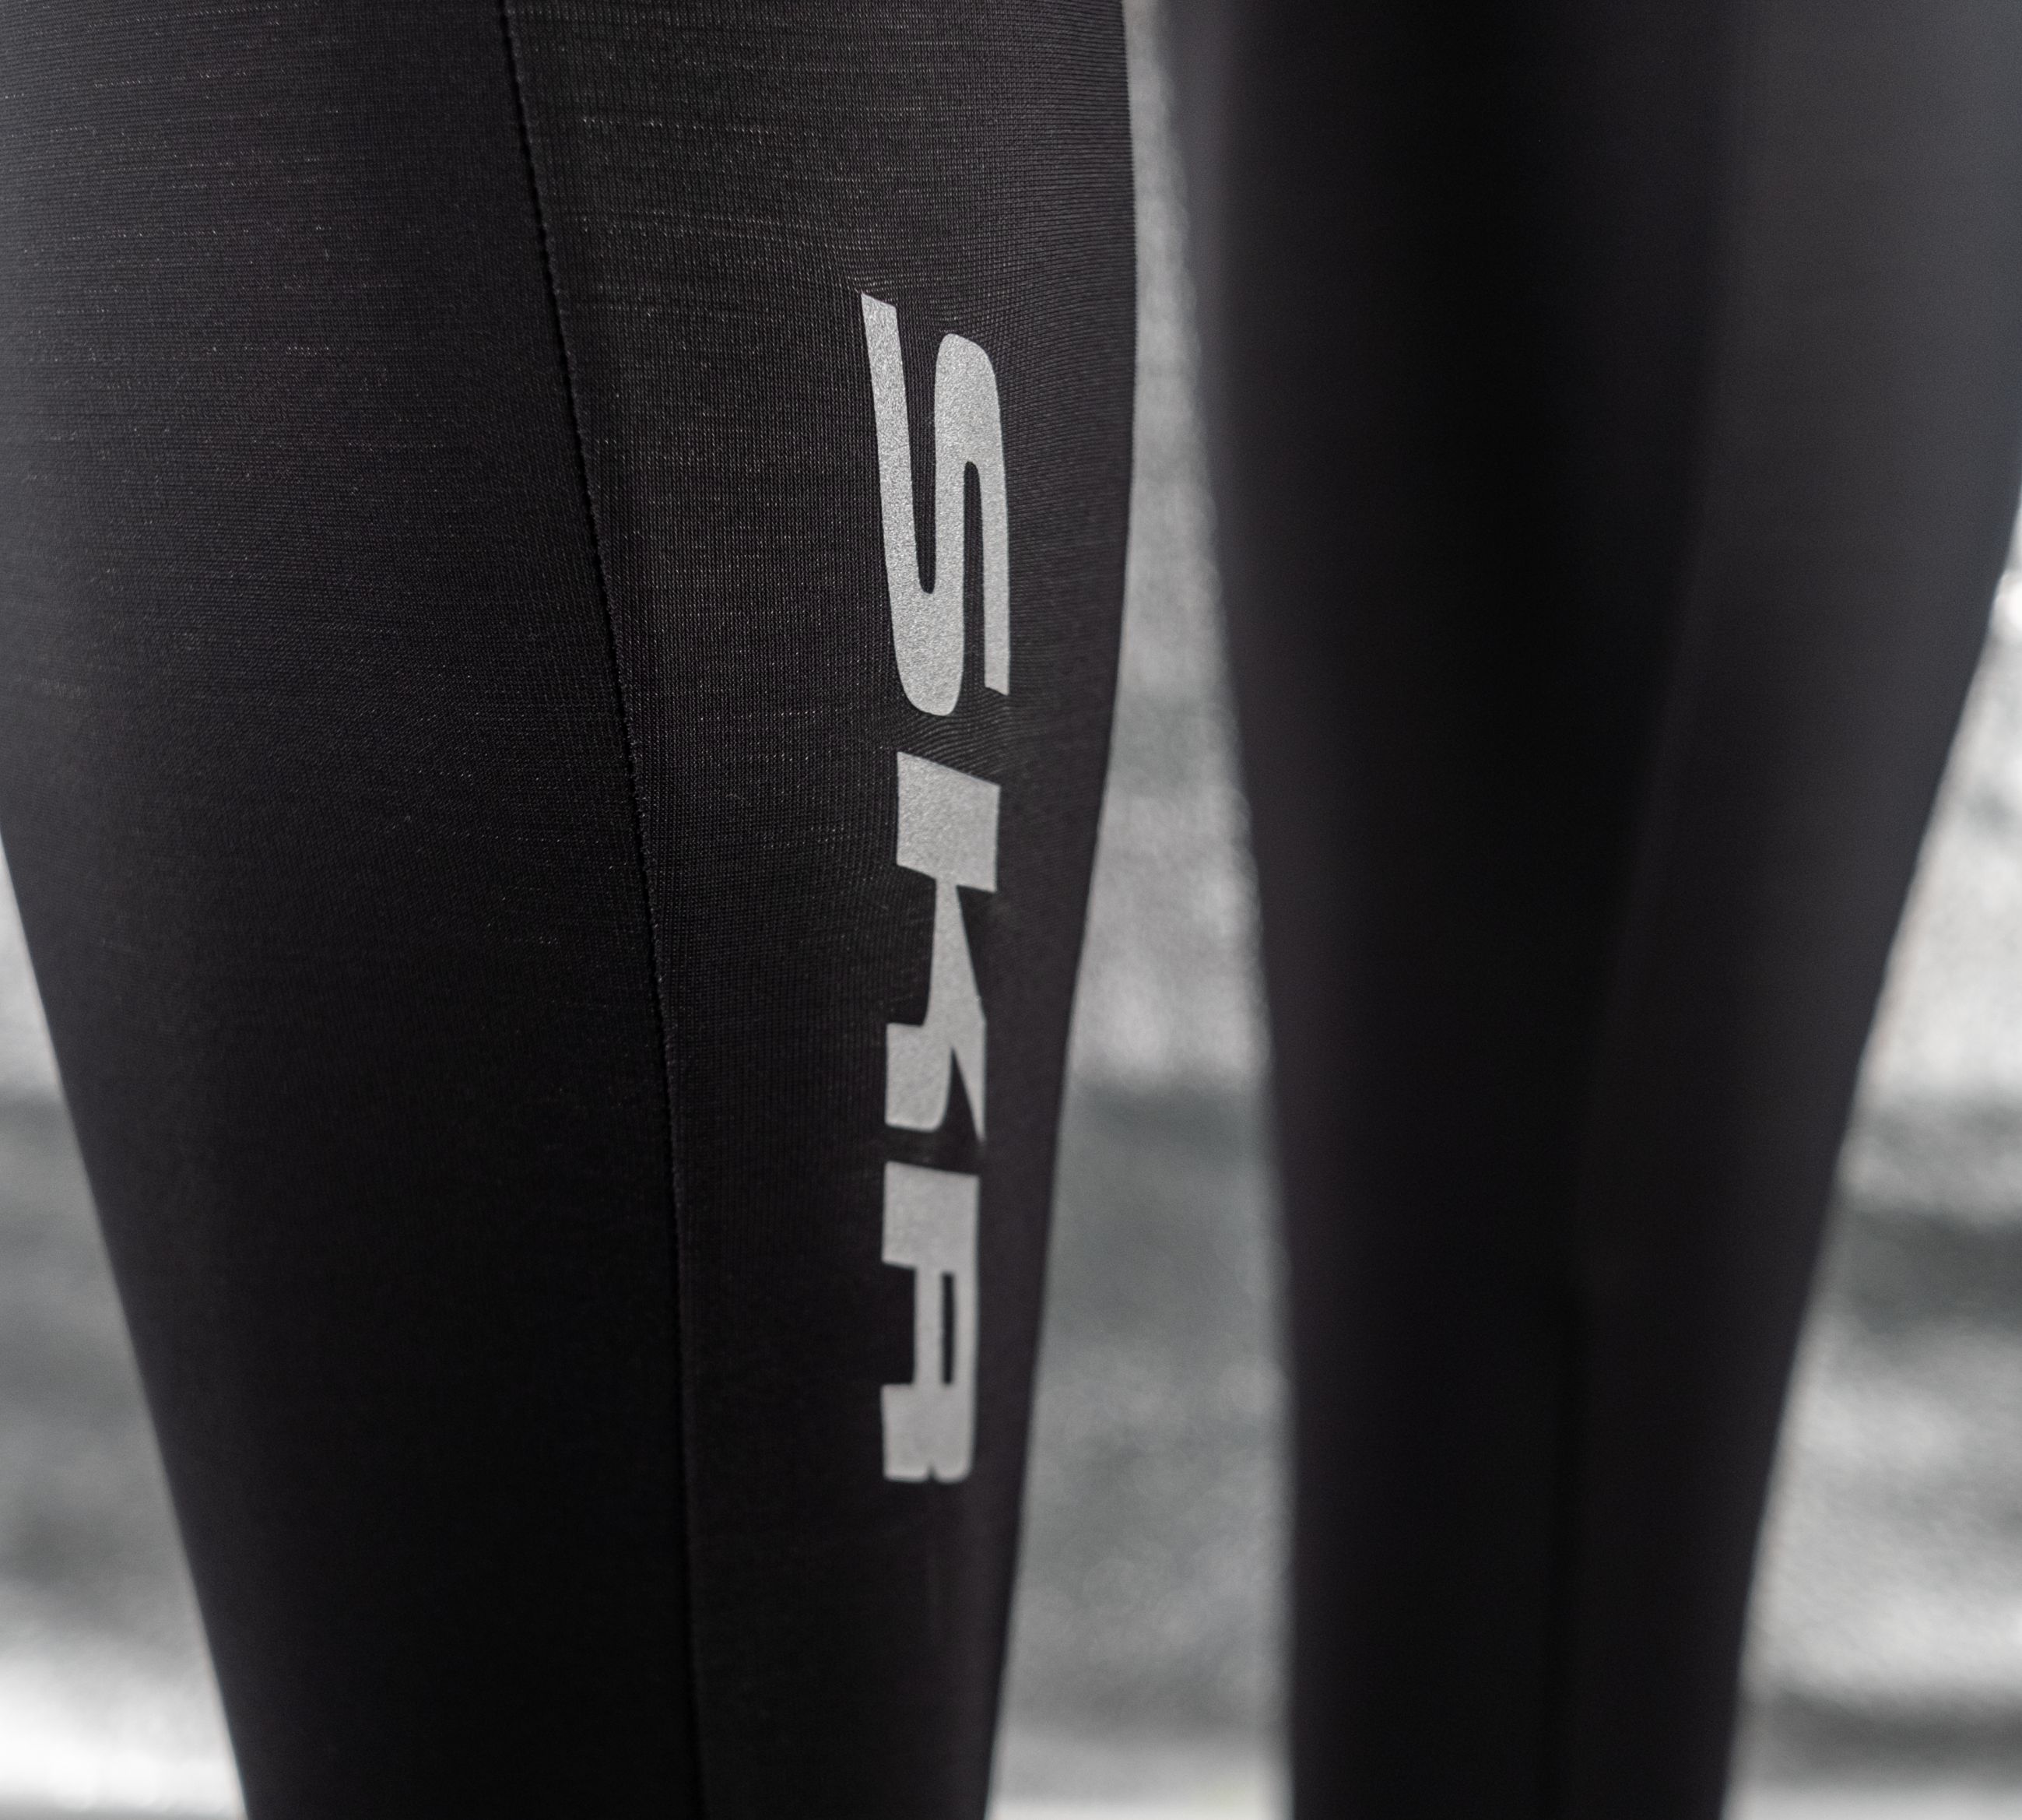 cep Recovery Pro Tights Herren